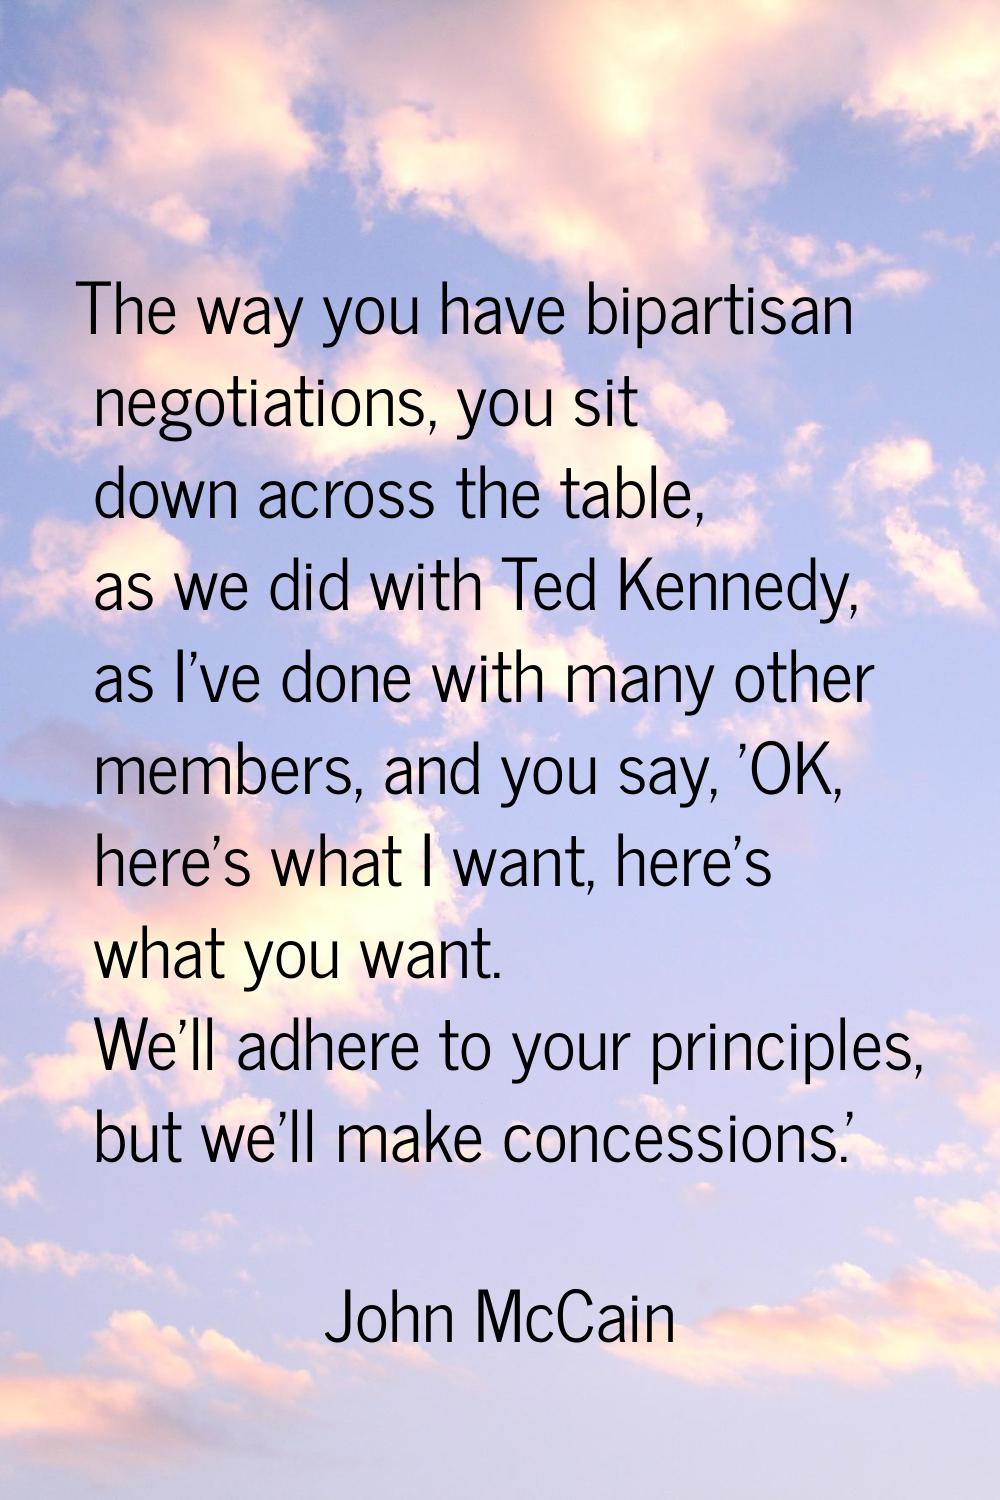 The way you have bipartisan negotiations, you sit down across the table, as we did with Ted Kennedy